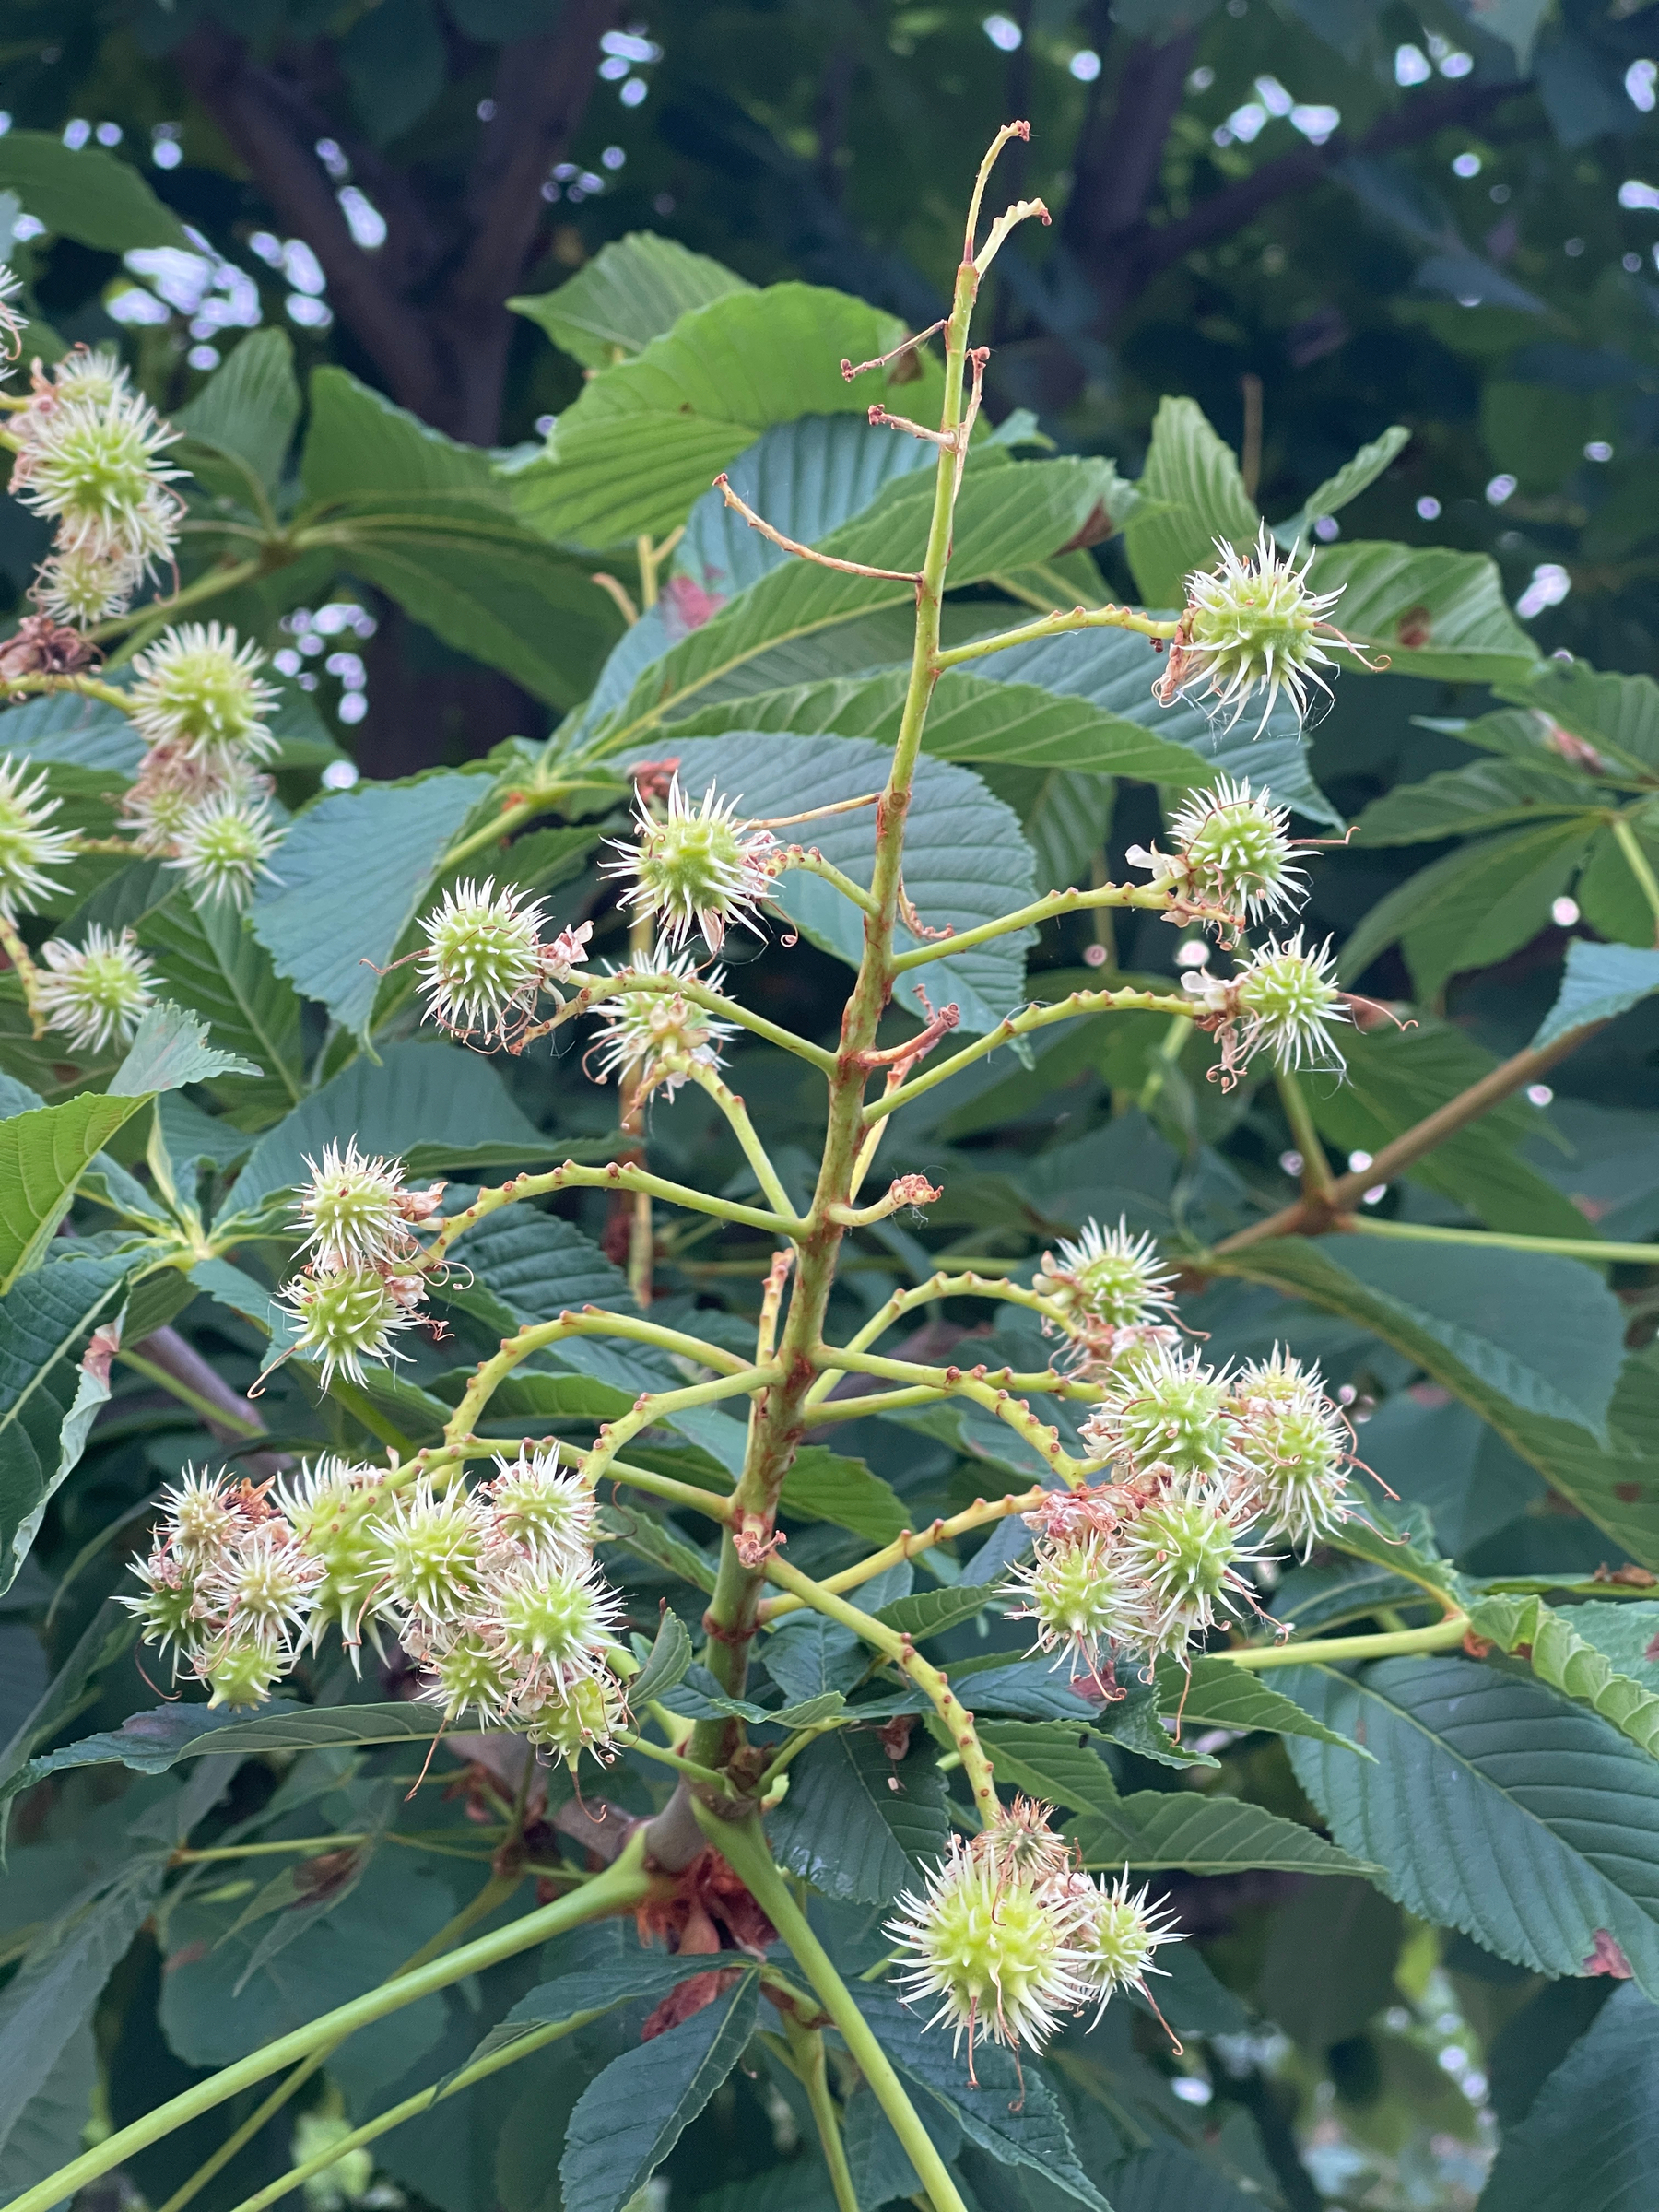 Chestnuts forming on a chestnuts tree&hellip;